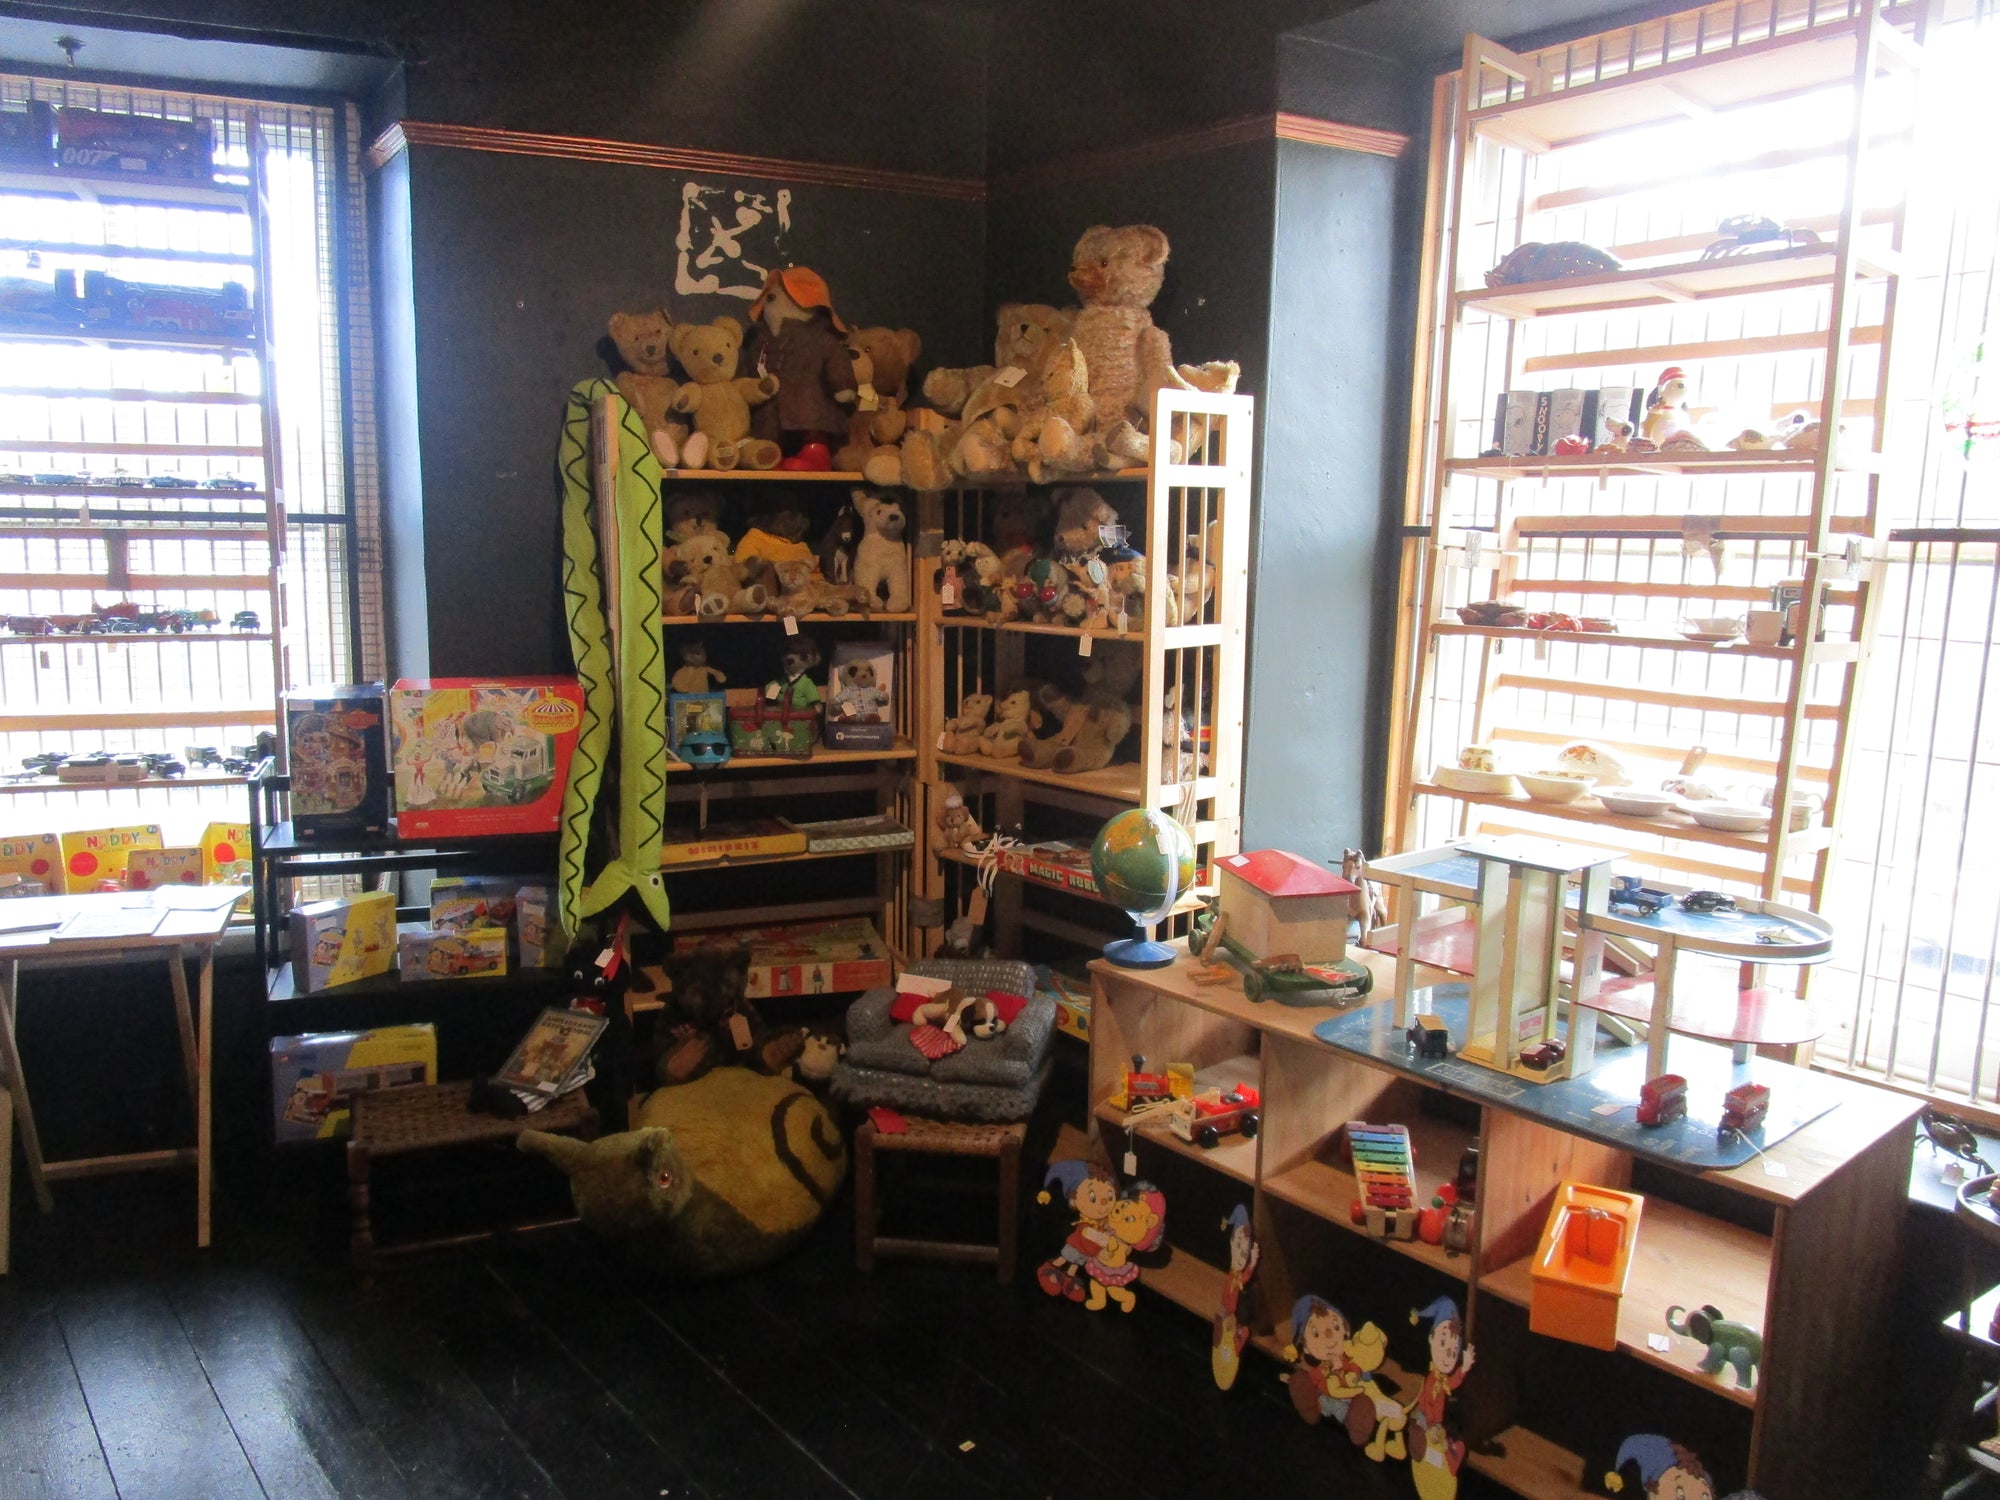 Toys are us say Matt and Elizabeth Davies of Top Banana Antiques